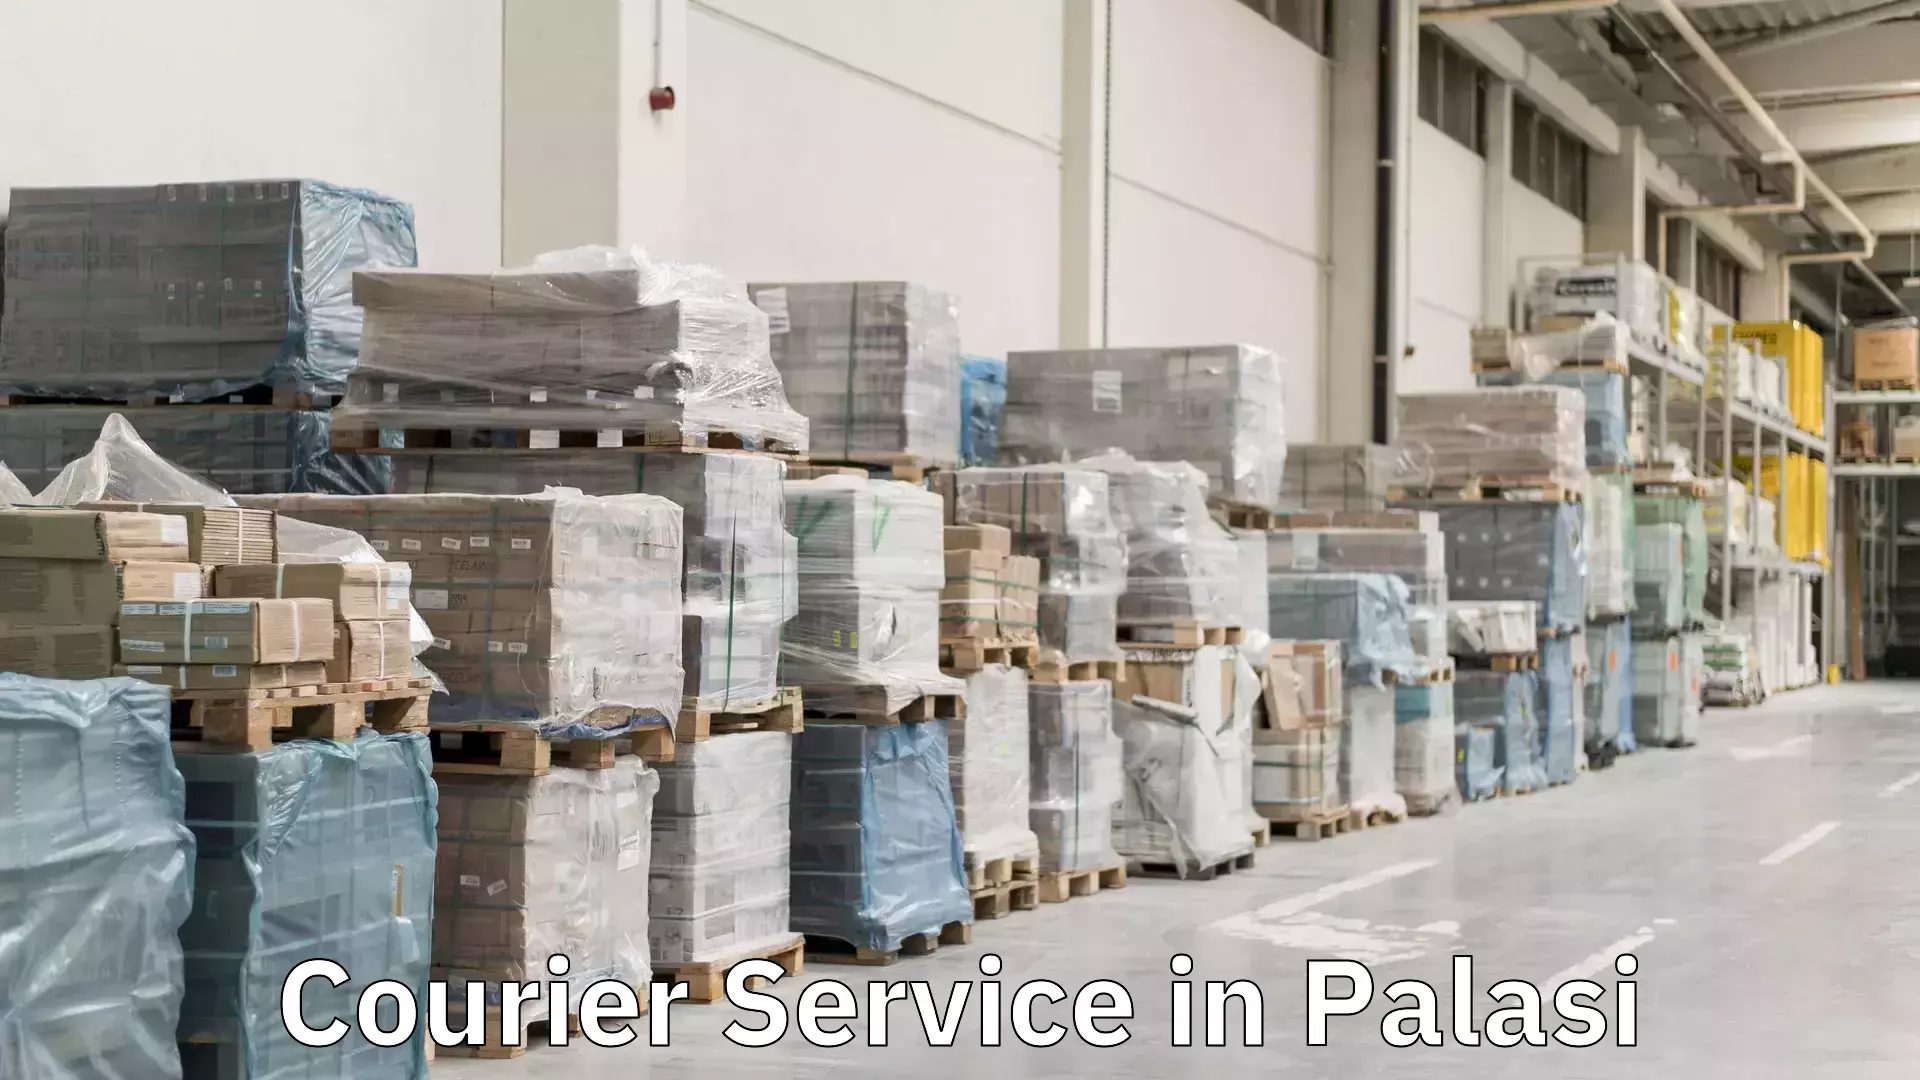 Secure freight services in Palasi